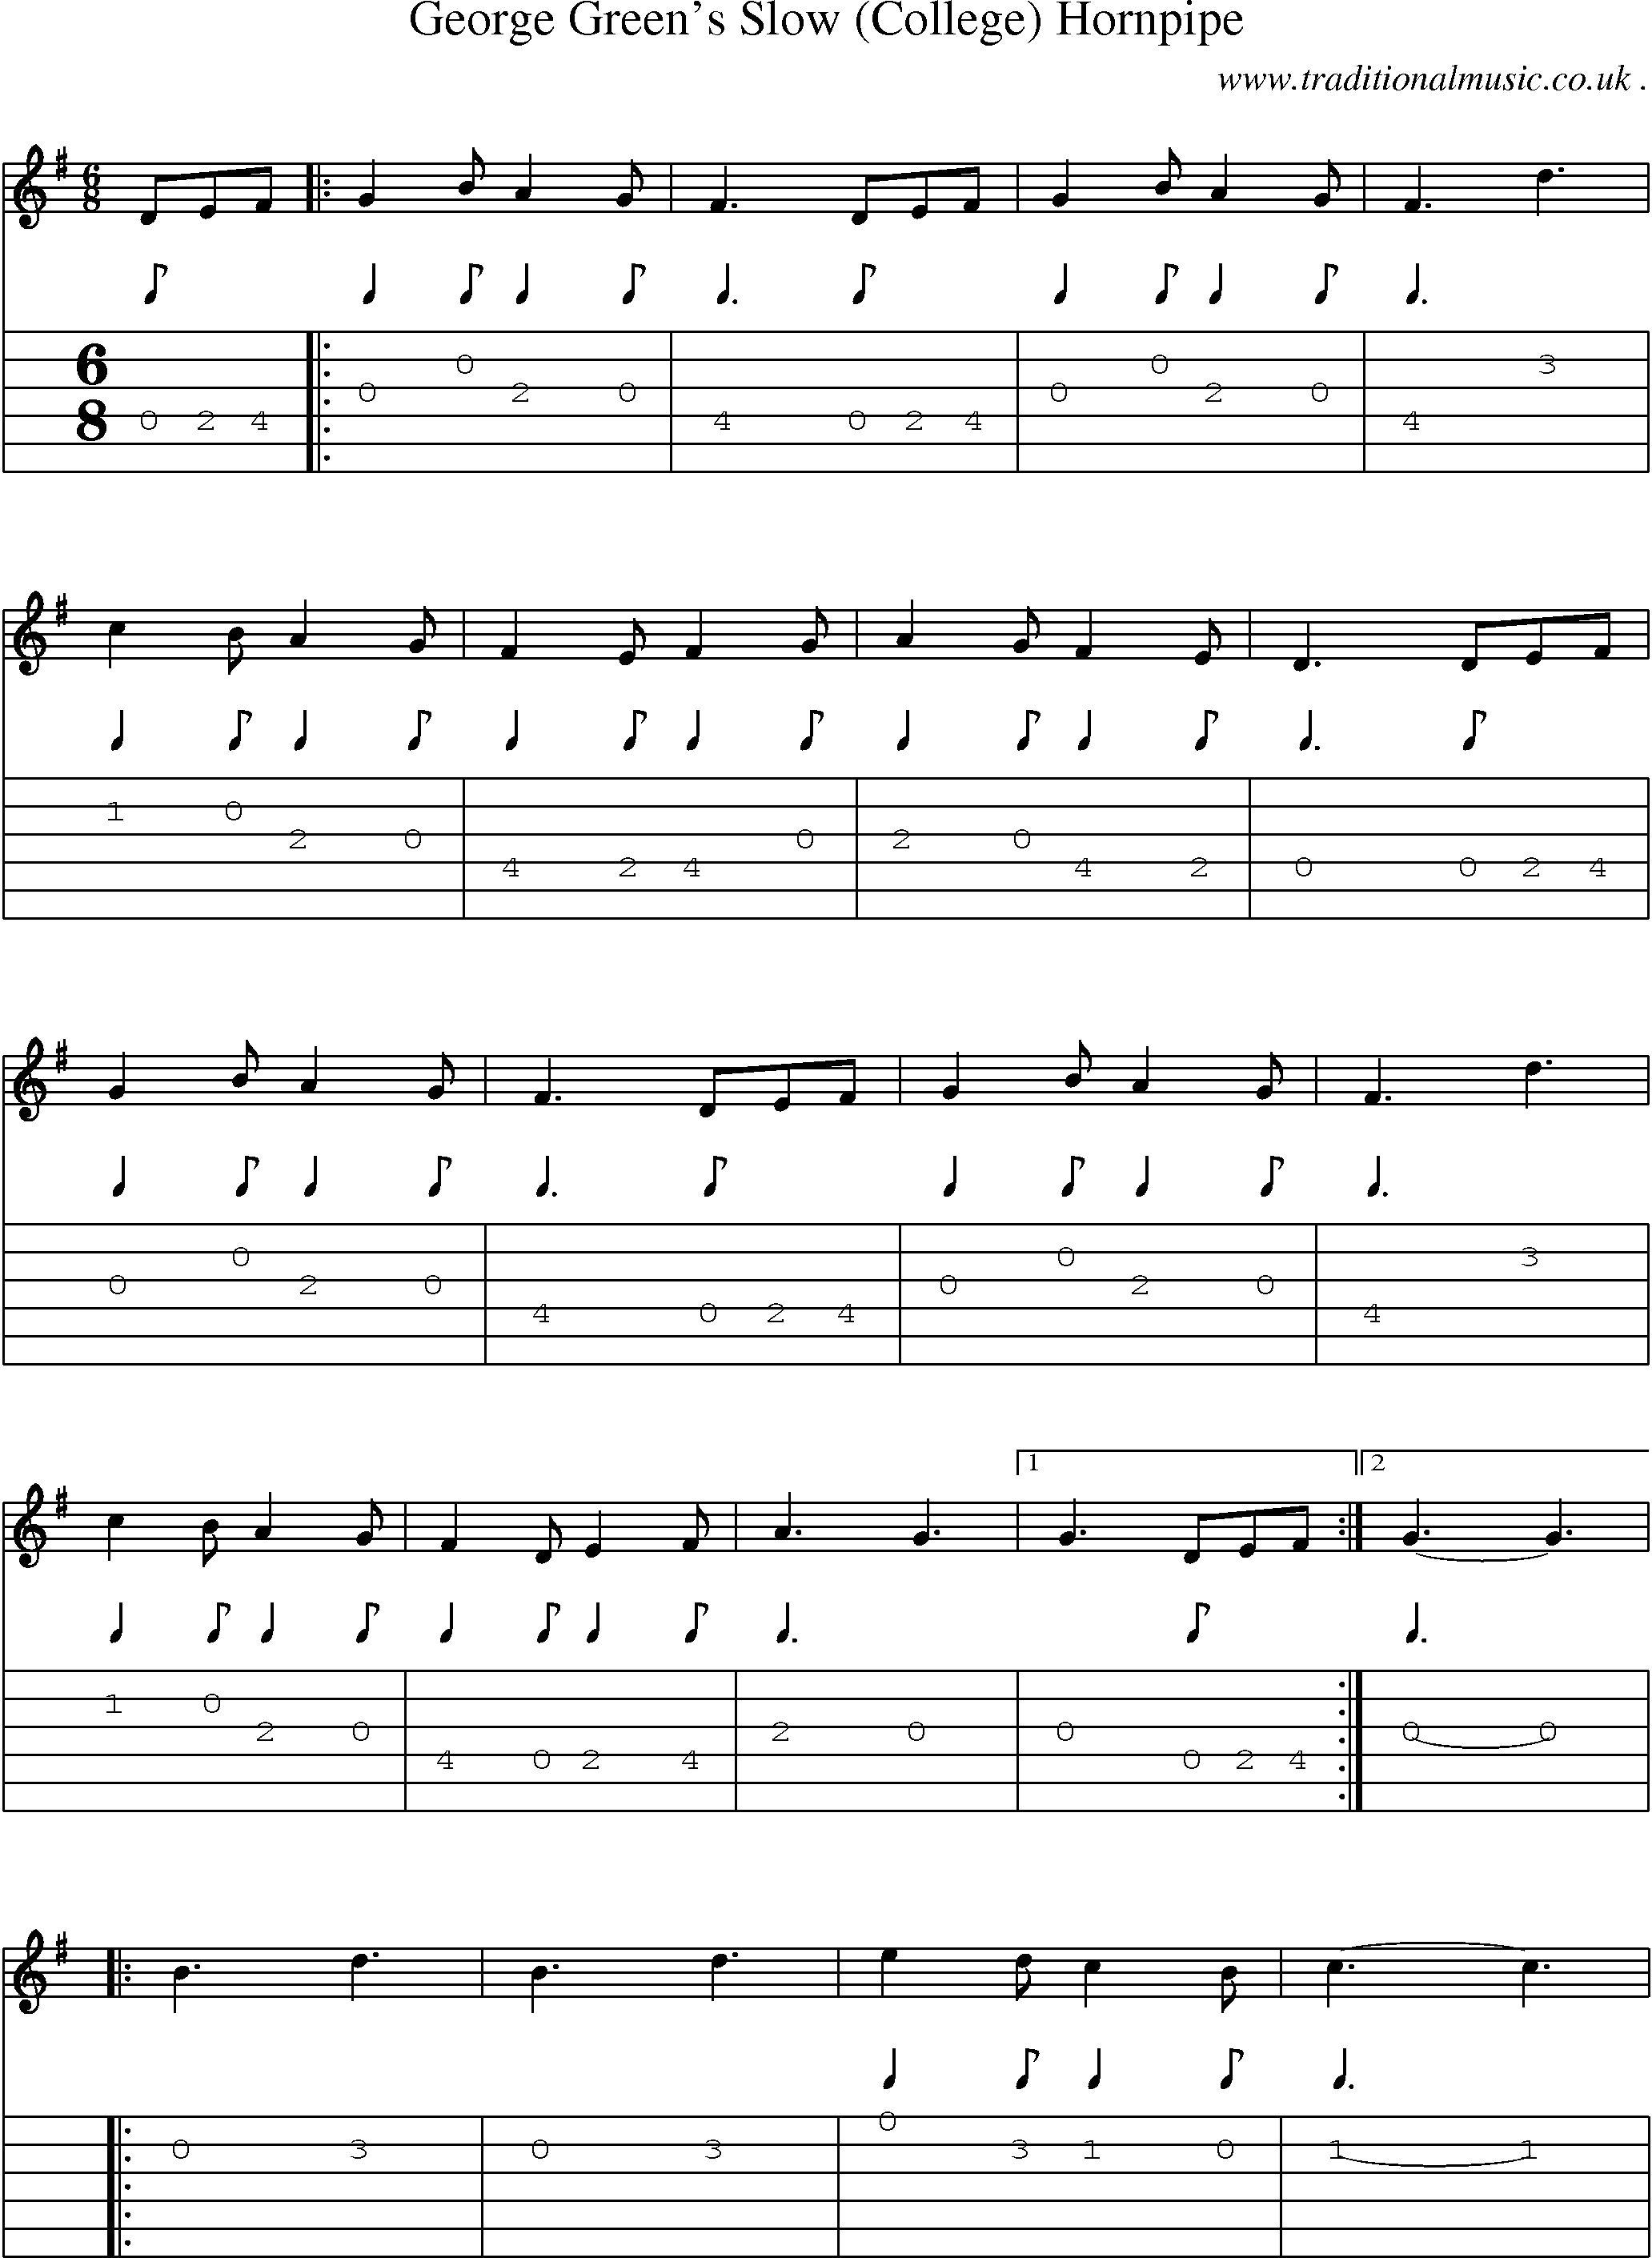 Sheet-Music and Guitar Tabs for George Greens Slow (college) Hornpipe